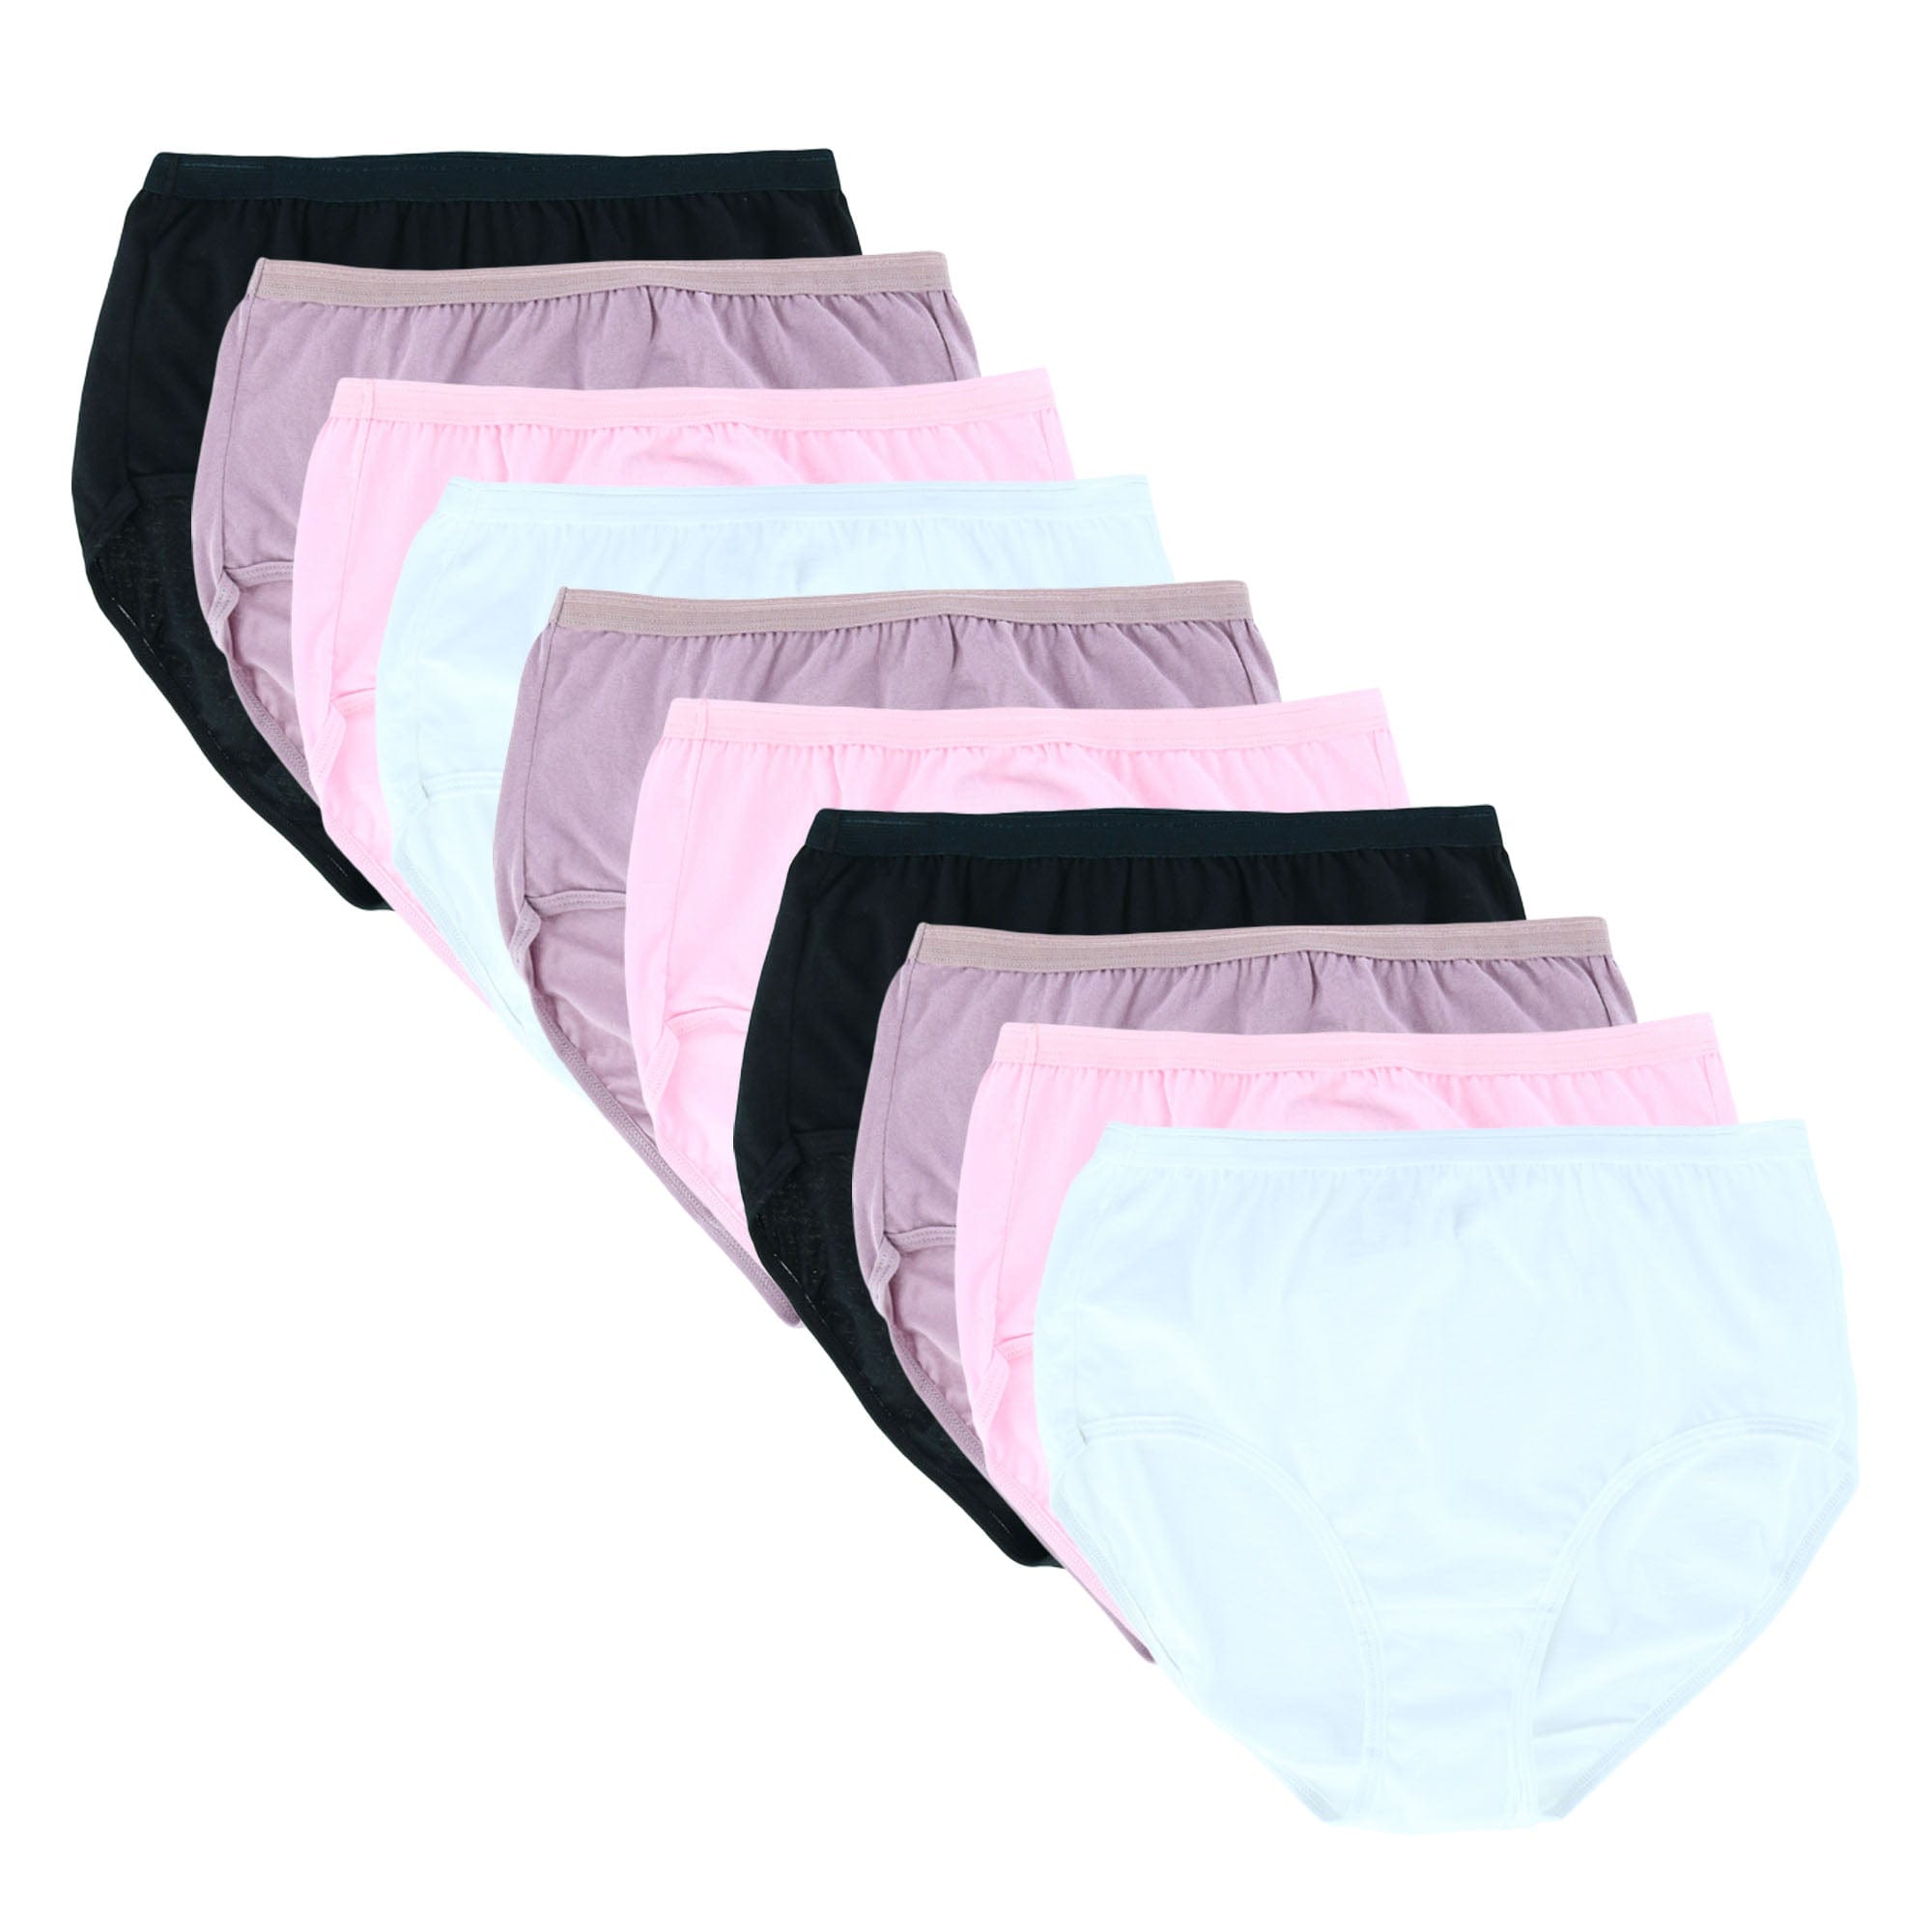 Women's Body Tone Cotton Brief Panty (10 Pack) by Fruit of the Loom